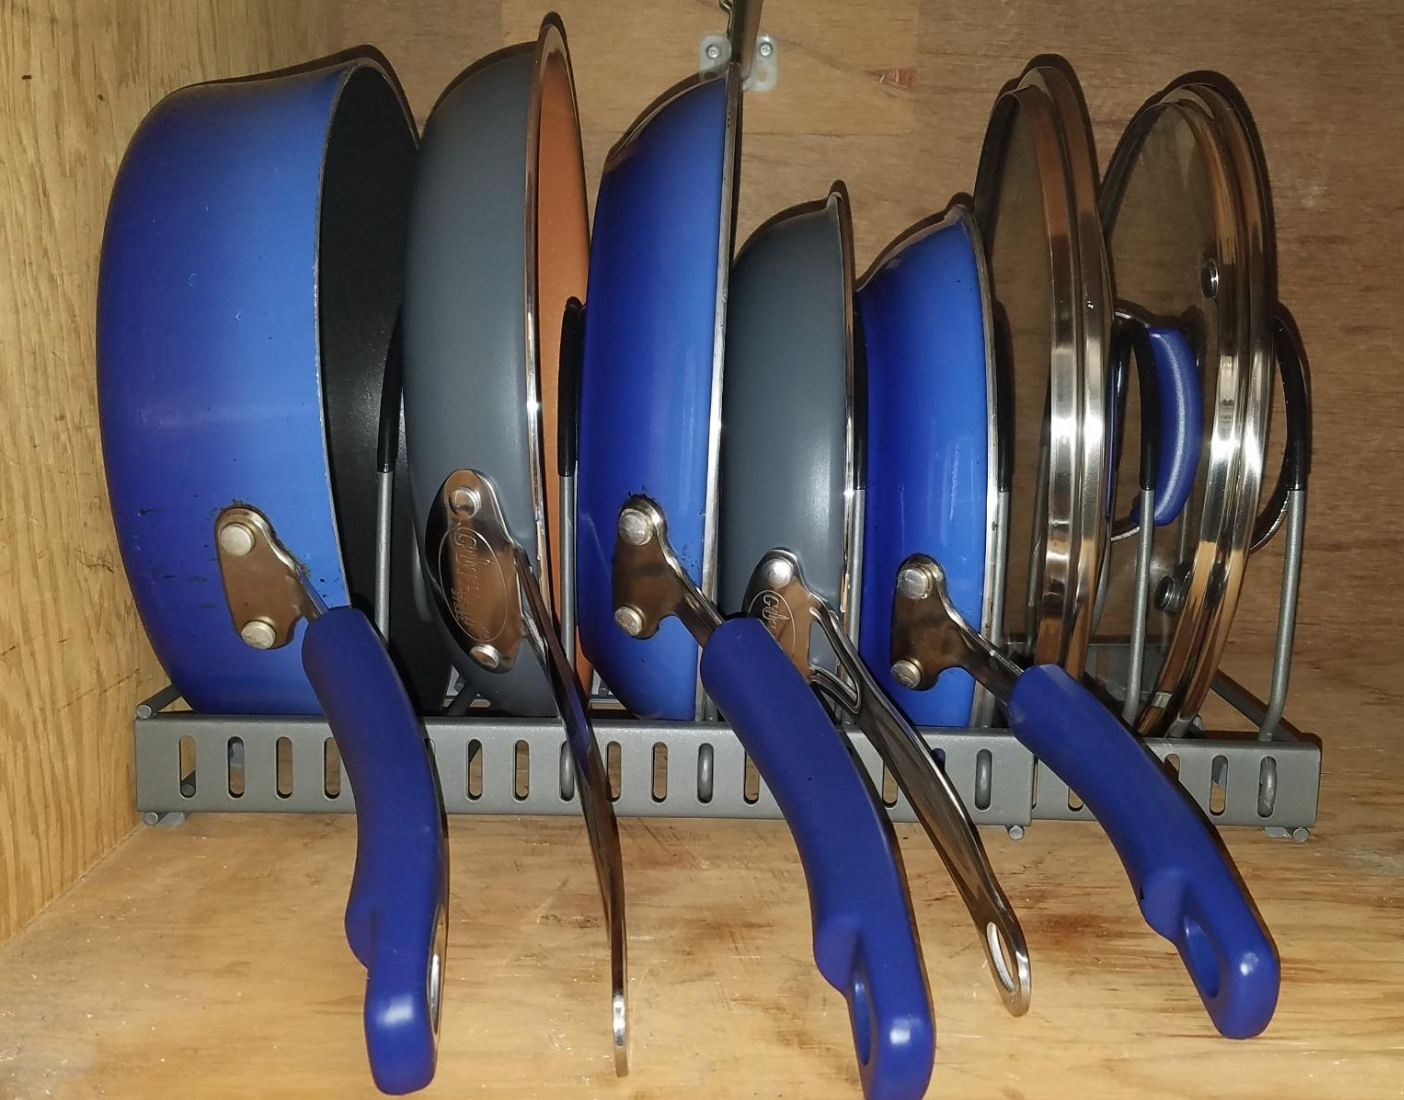 pans neatly organized on the holder